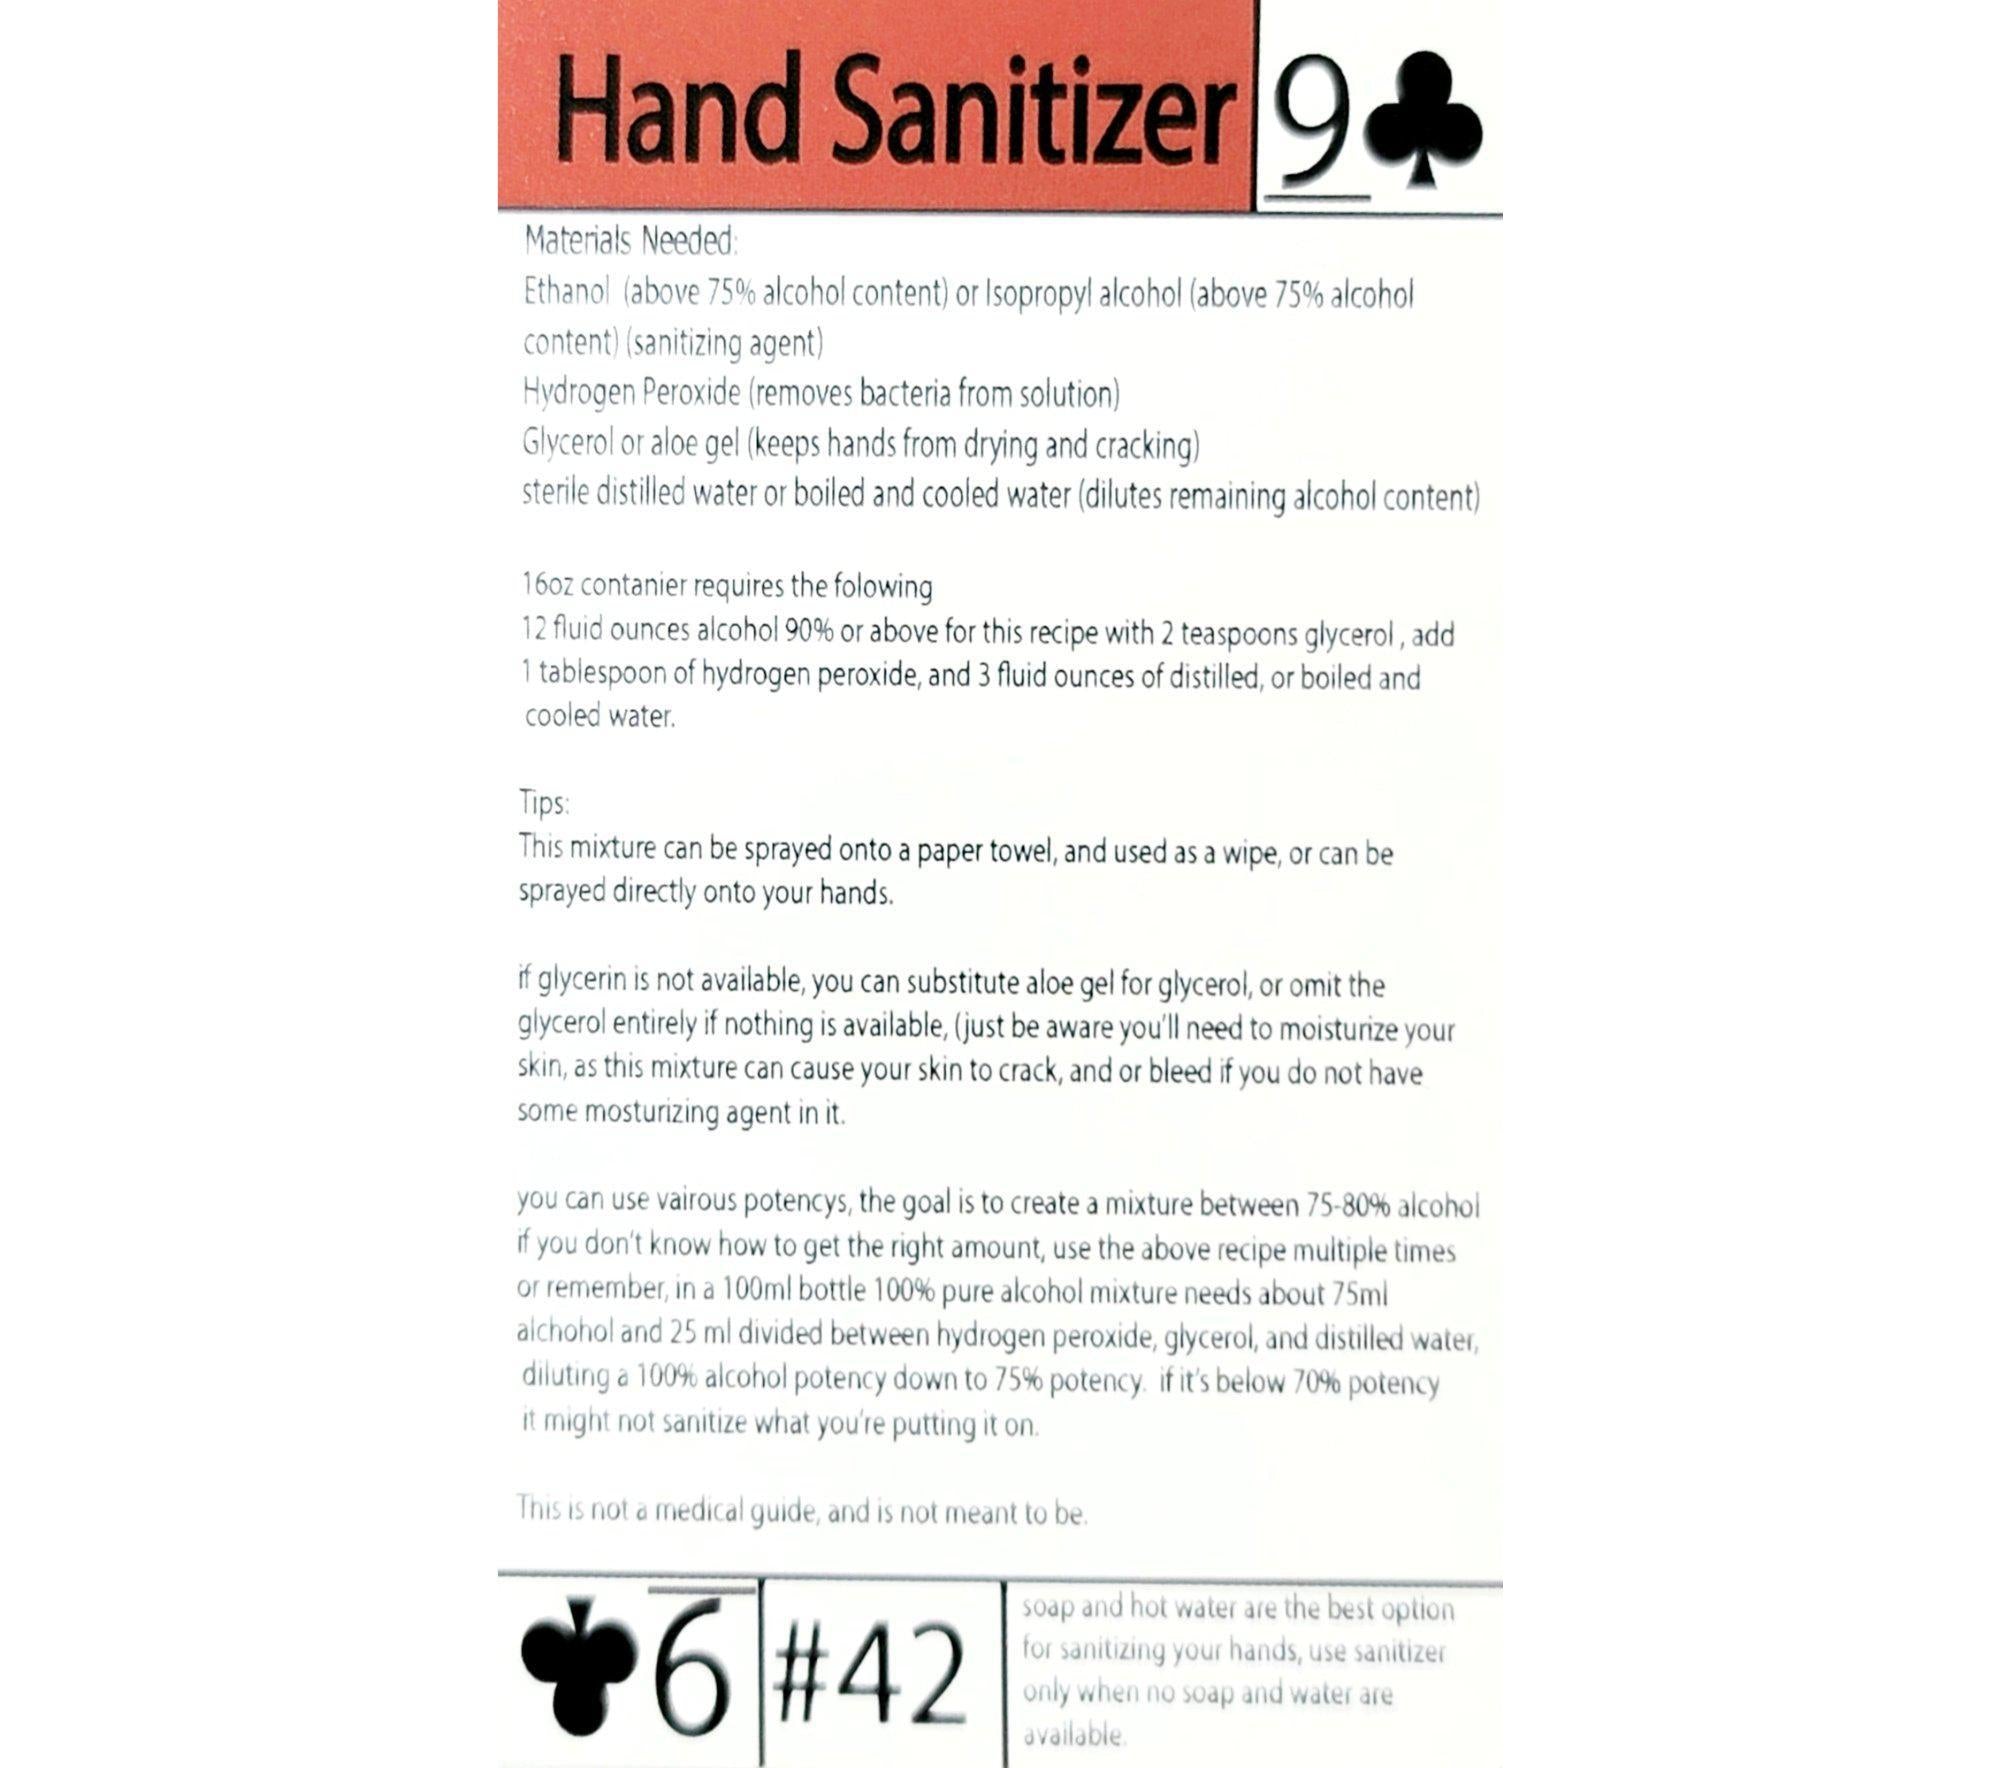 #42 sanitizer recipe and instructions-Grimworkshop-bugoutbag-bushcraft-edc-gear-edctool-everydaycarry-survivalcard-survivalkit-wilderness-prepping-toolkit